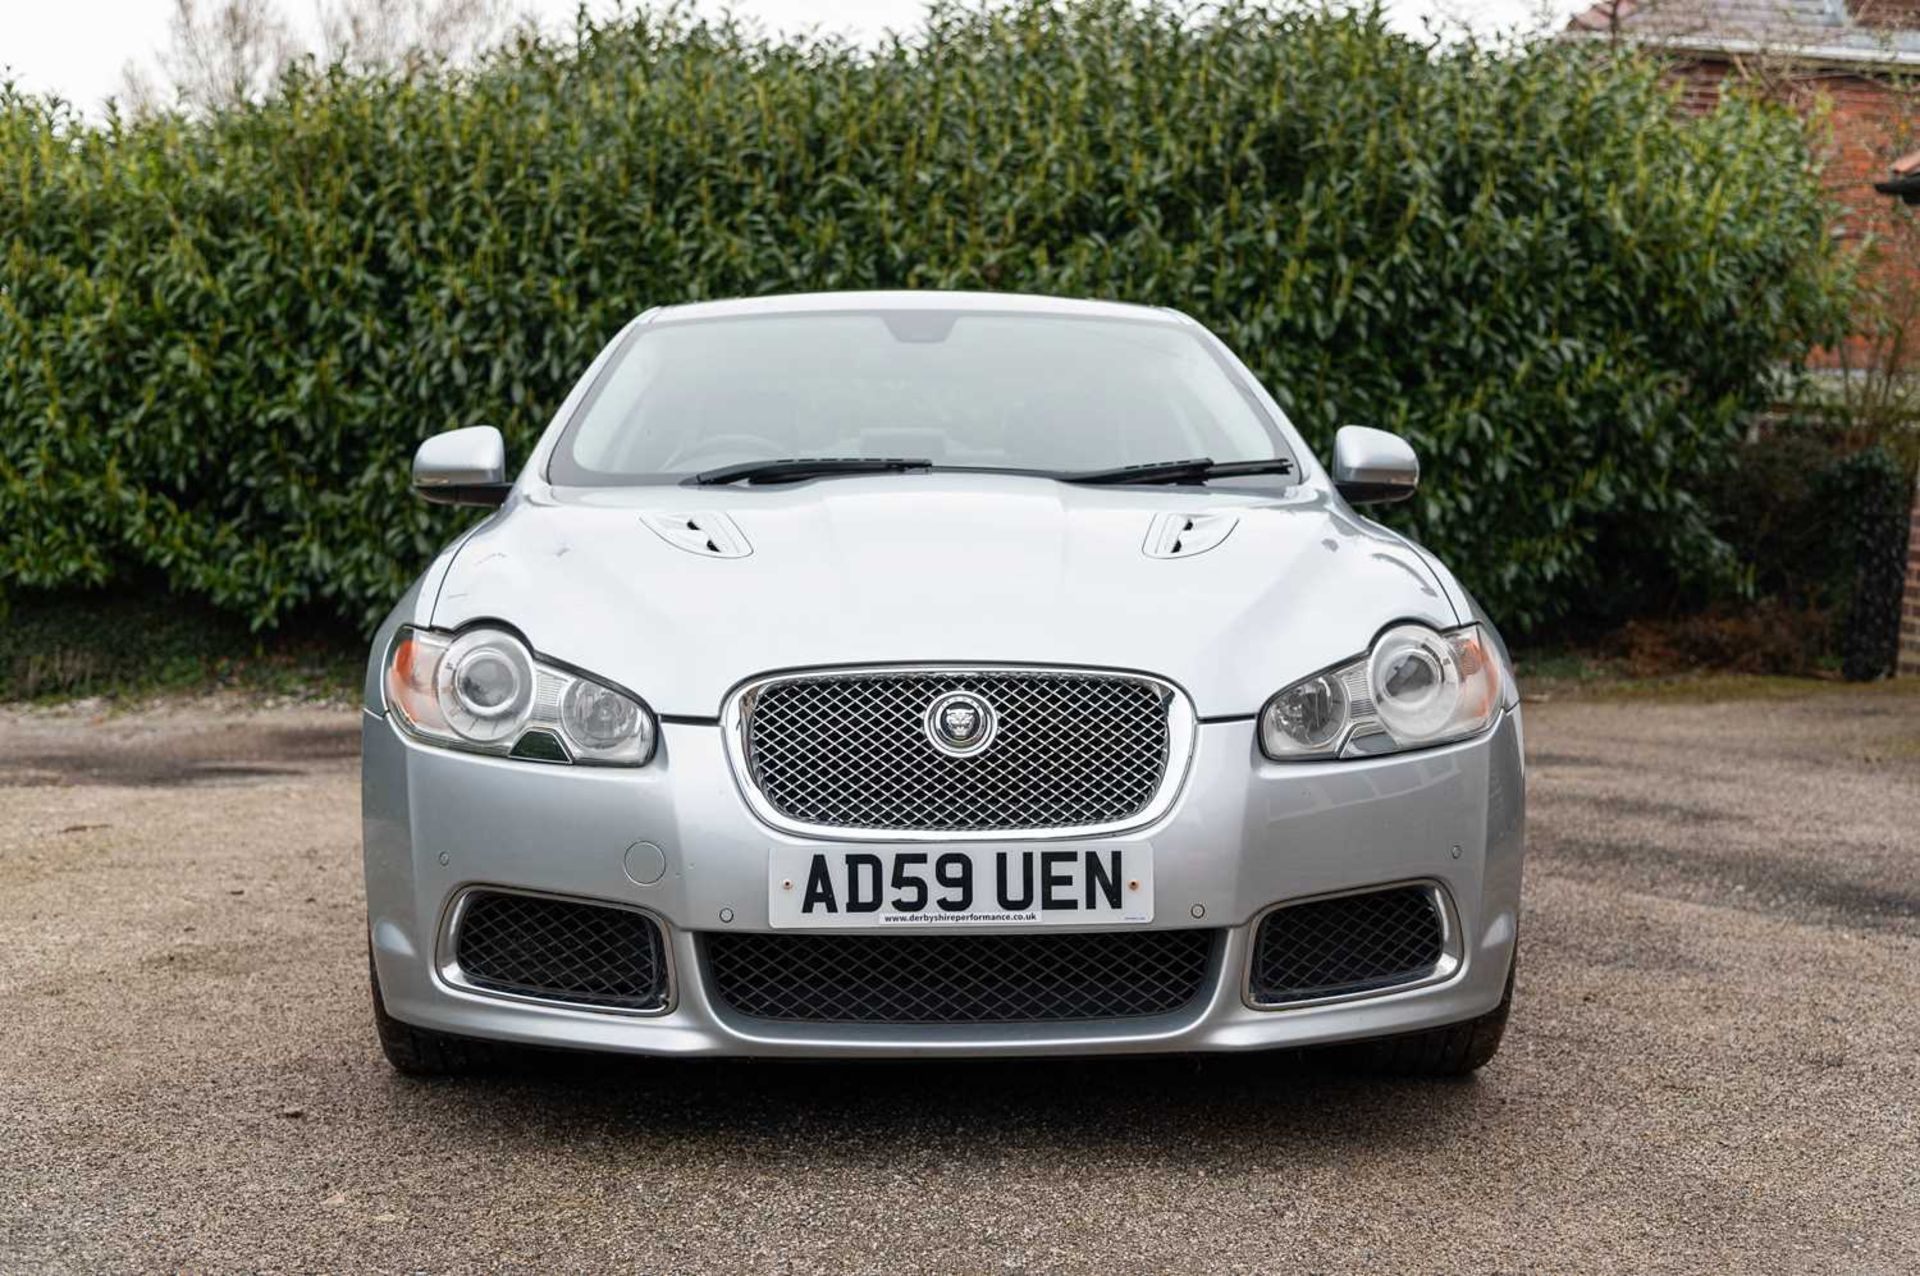 2009 Jaguar XFR Saloon 500 horsepower four-door super saloon, with full service history - Image 4 of 81